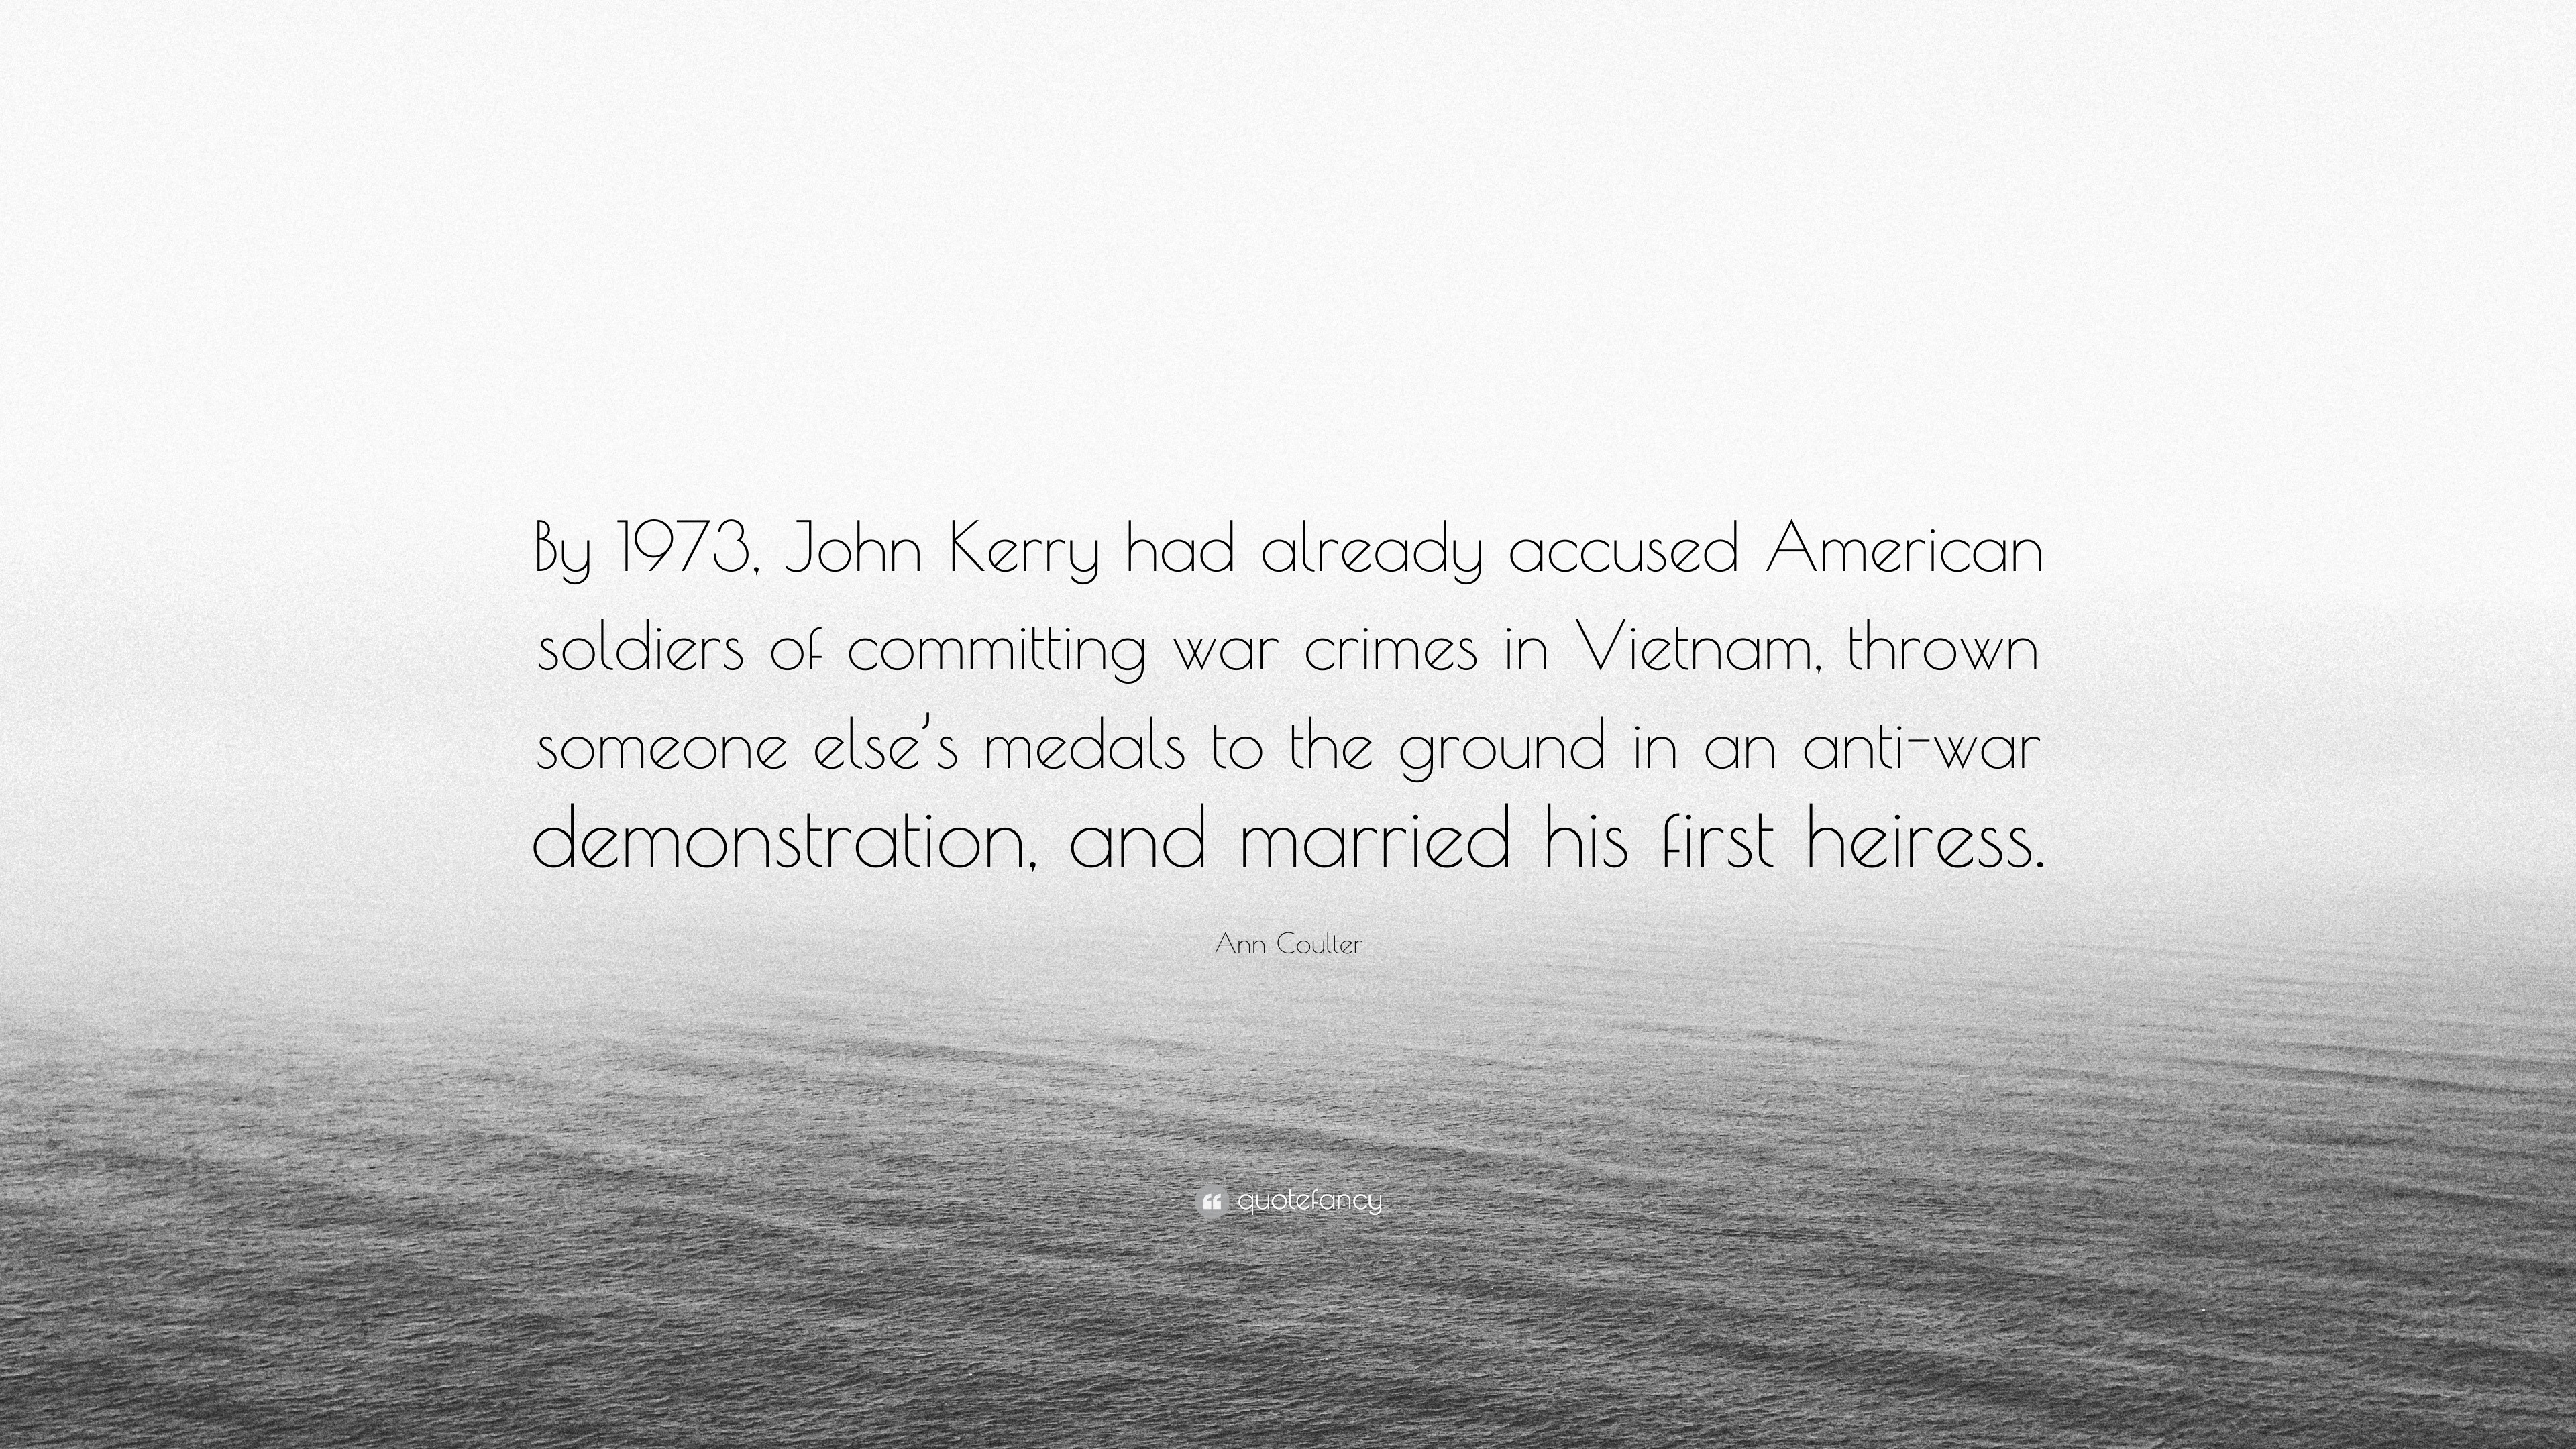 Ann Coulter Quote “By 1973, John Kerry had already accused American soldiers of committing war crimes in Vietnam, thrown someone elses med...” picture